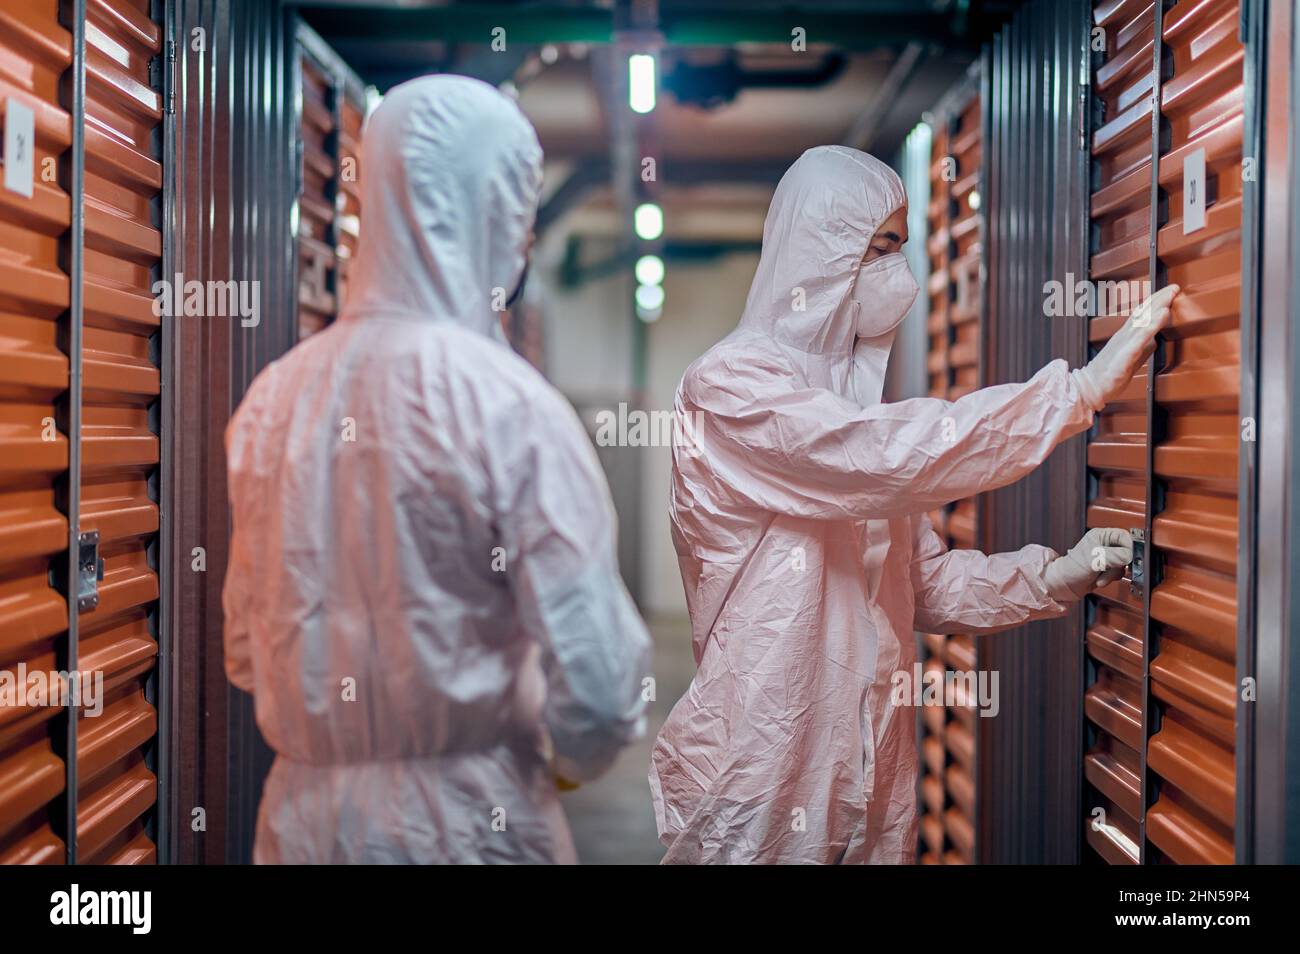 People in protective gear standing before the warehouse storage equipment Stock Photo